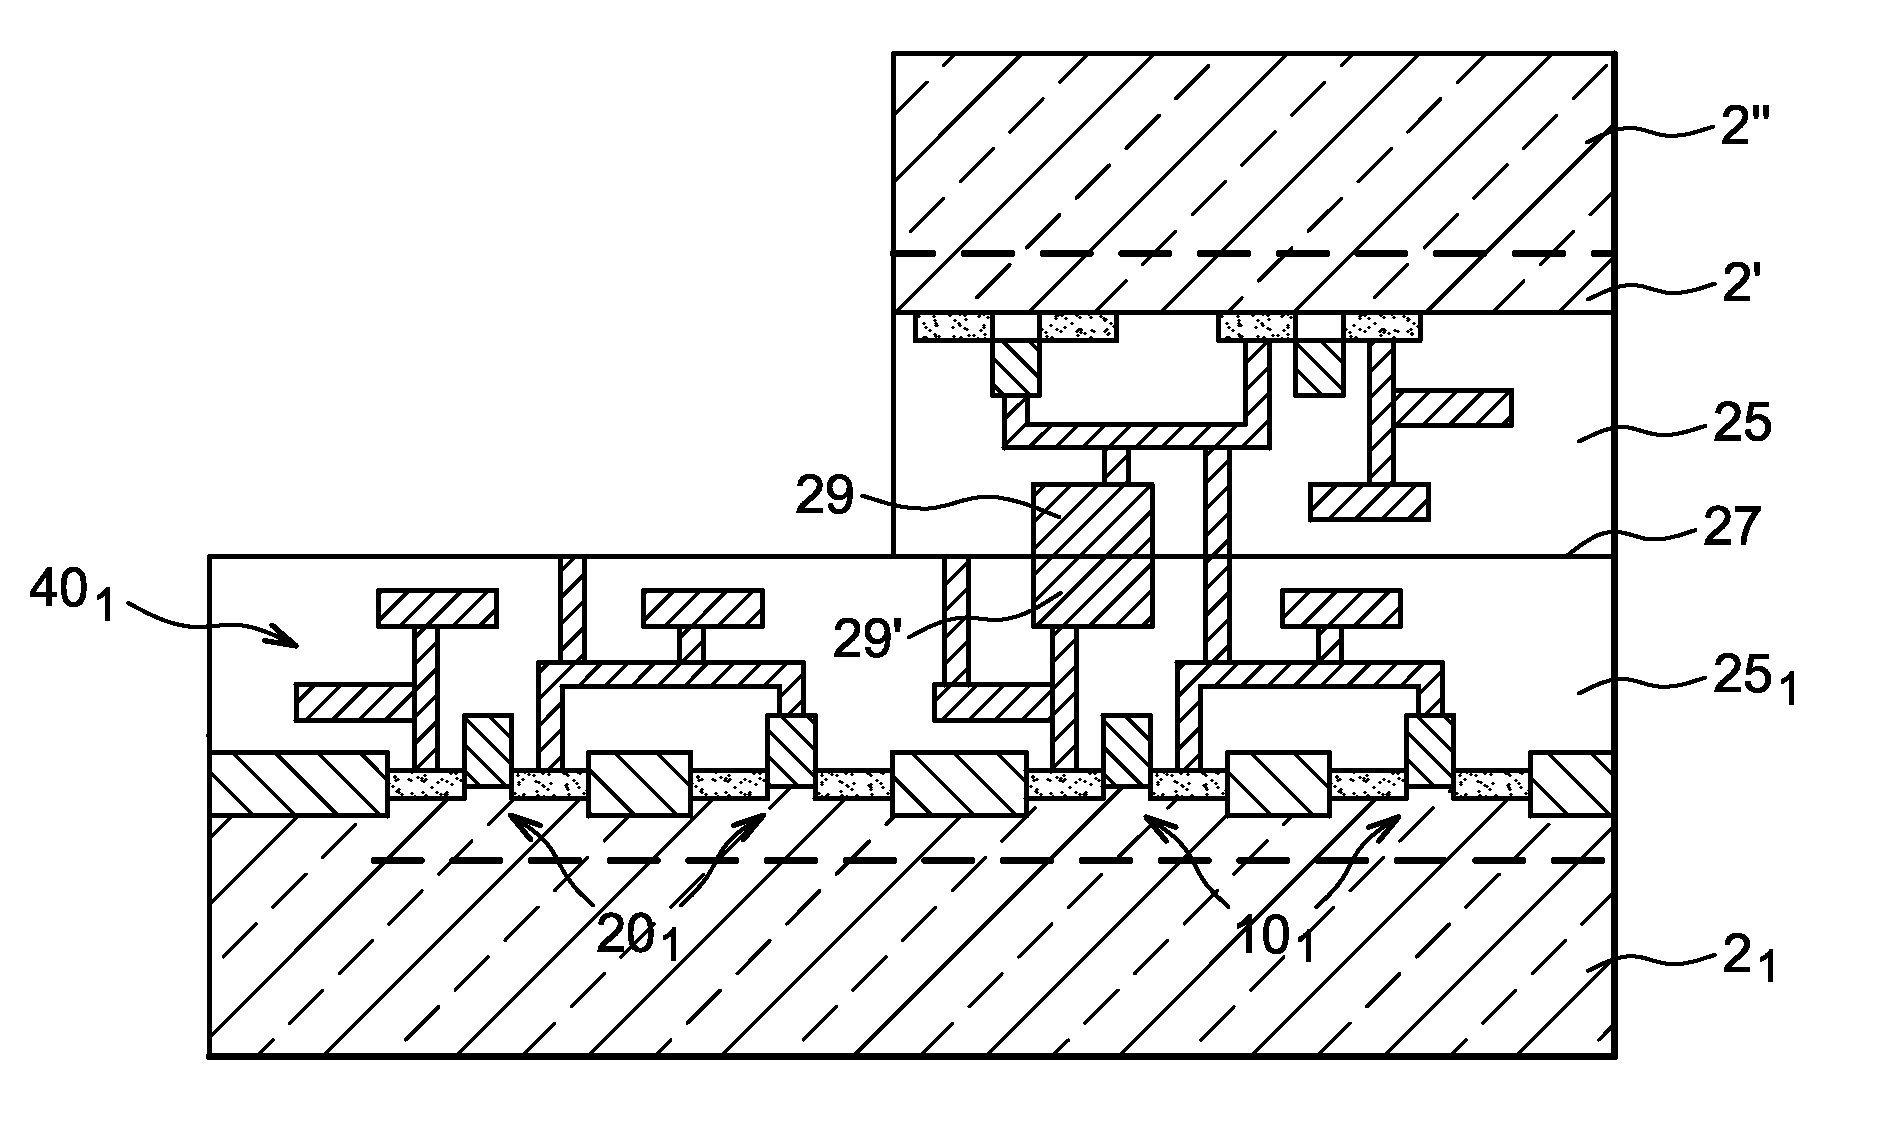 Method for transferring chips onto a substrate